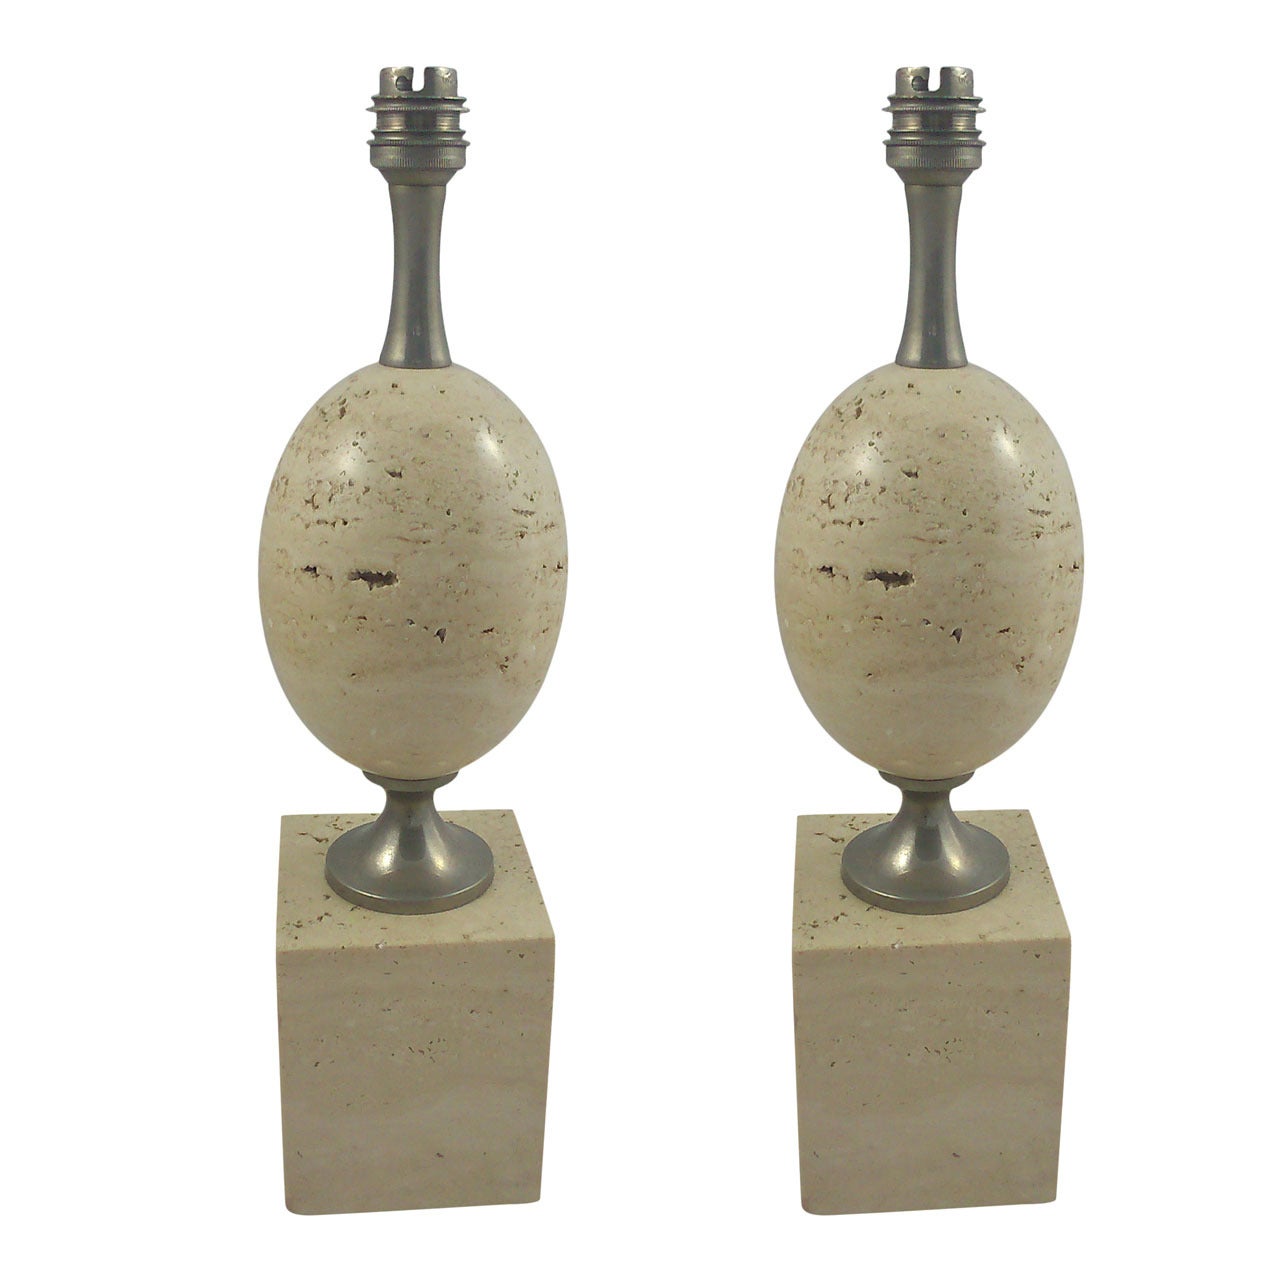 Pair of petite travertine table lamps by P. Barbier - France 1970's - Ipso Facto